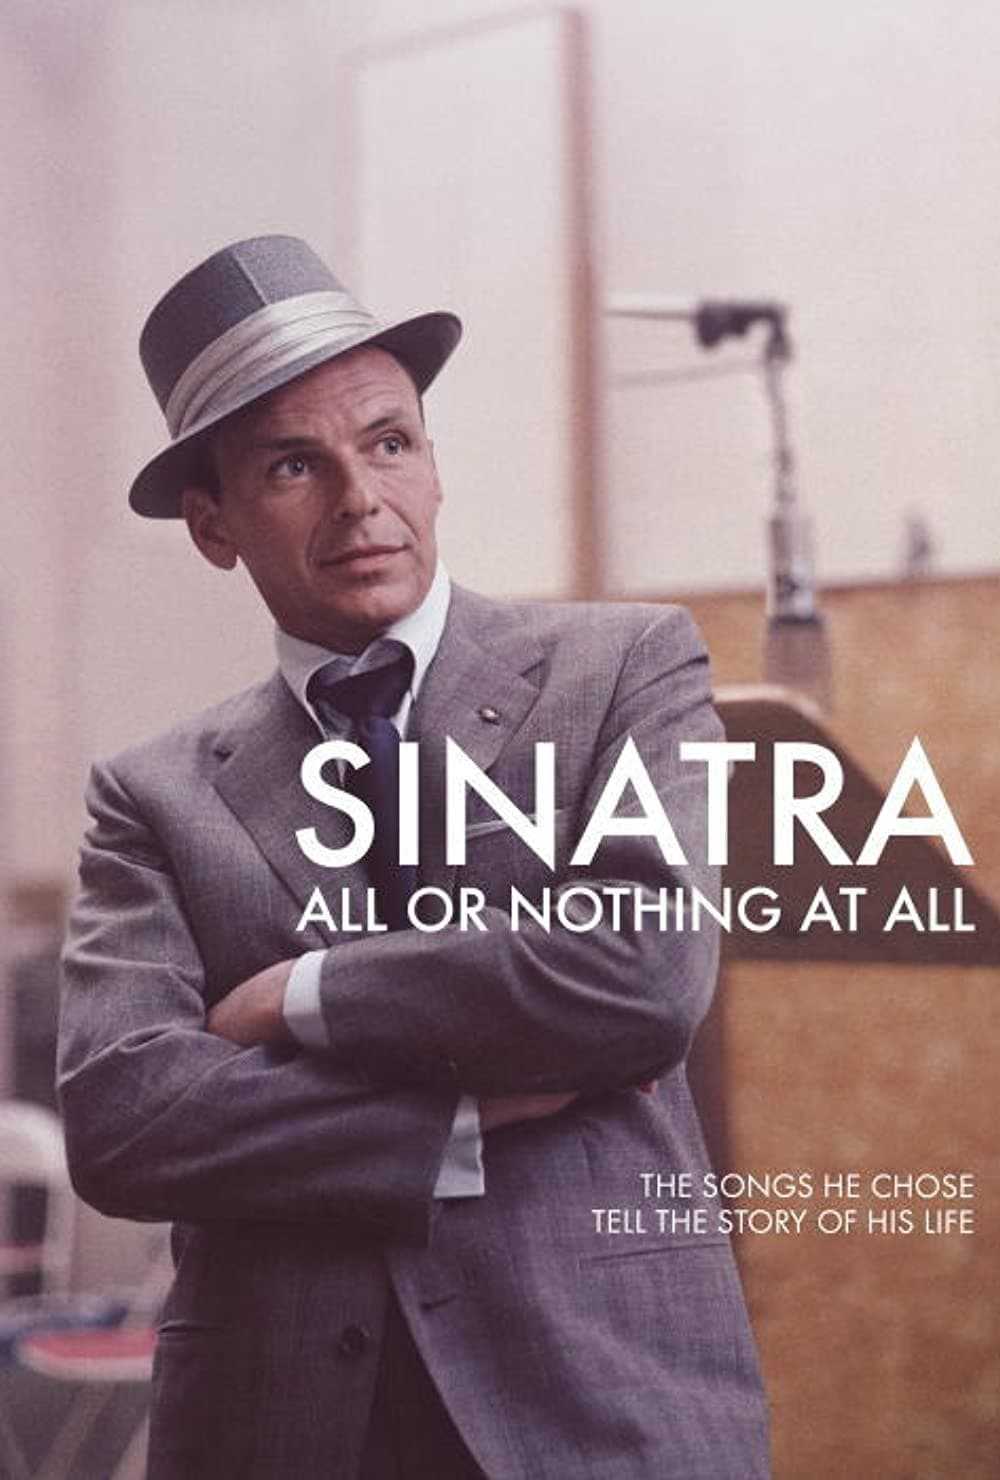 Sinatra - All or Nothing at All in streaming